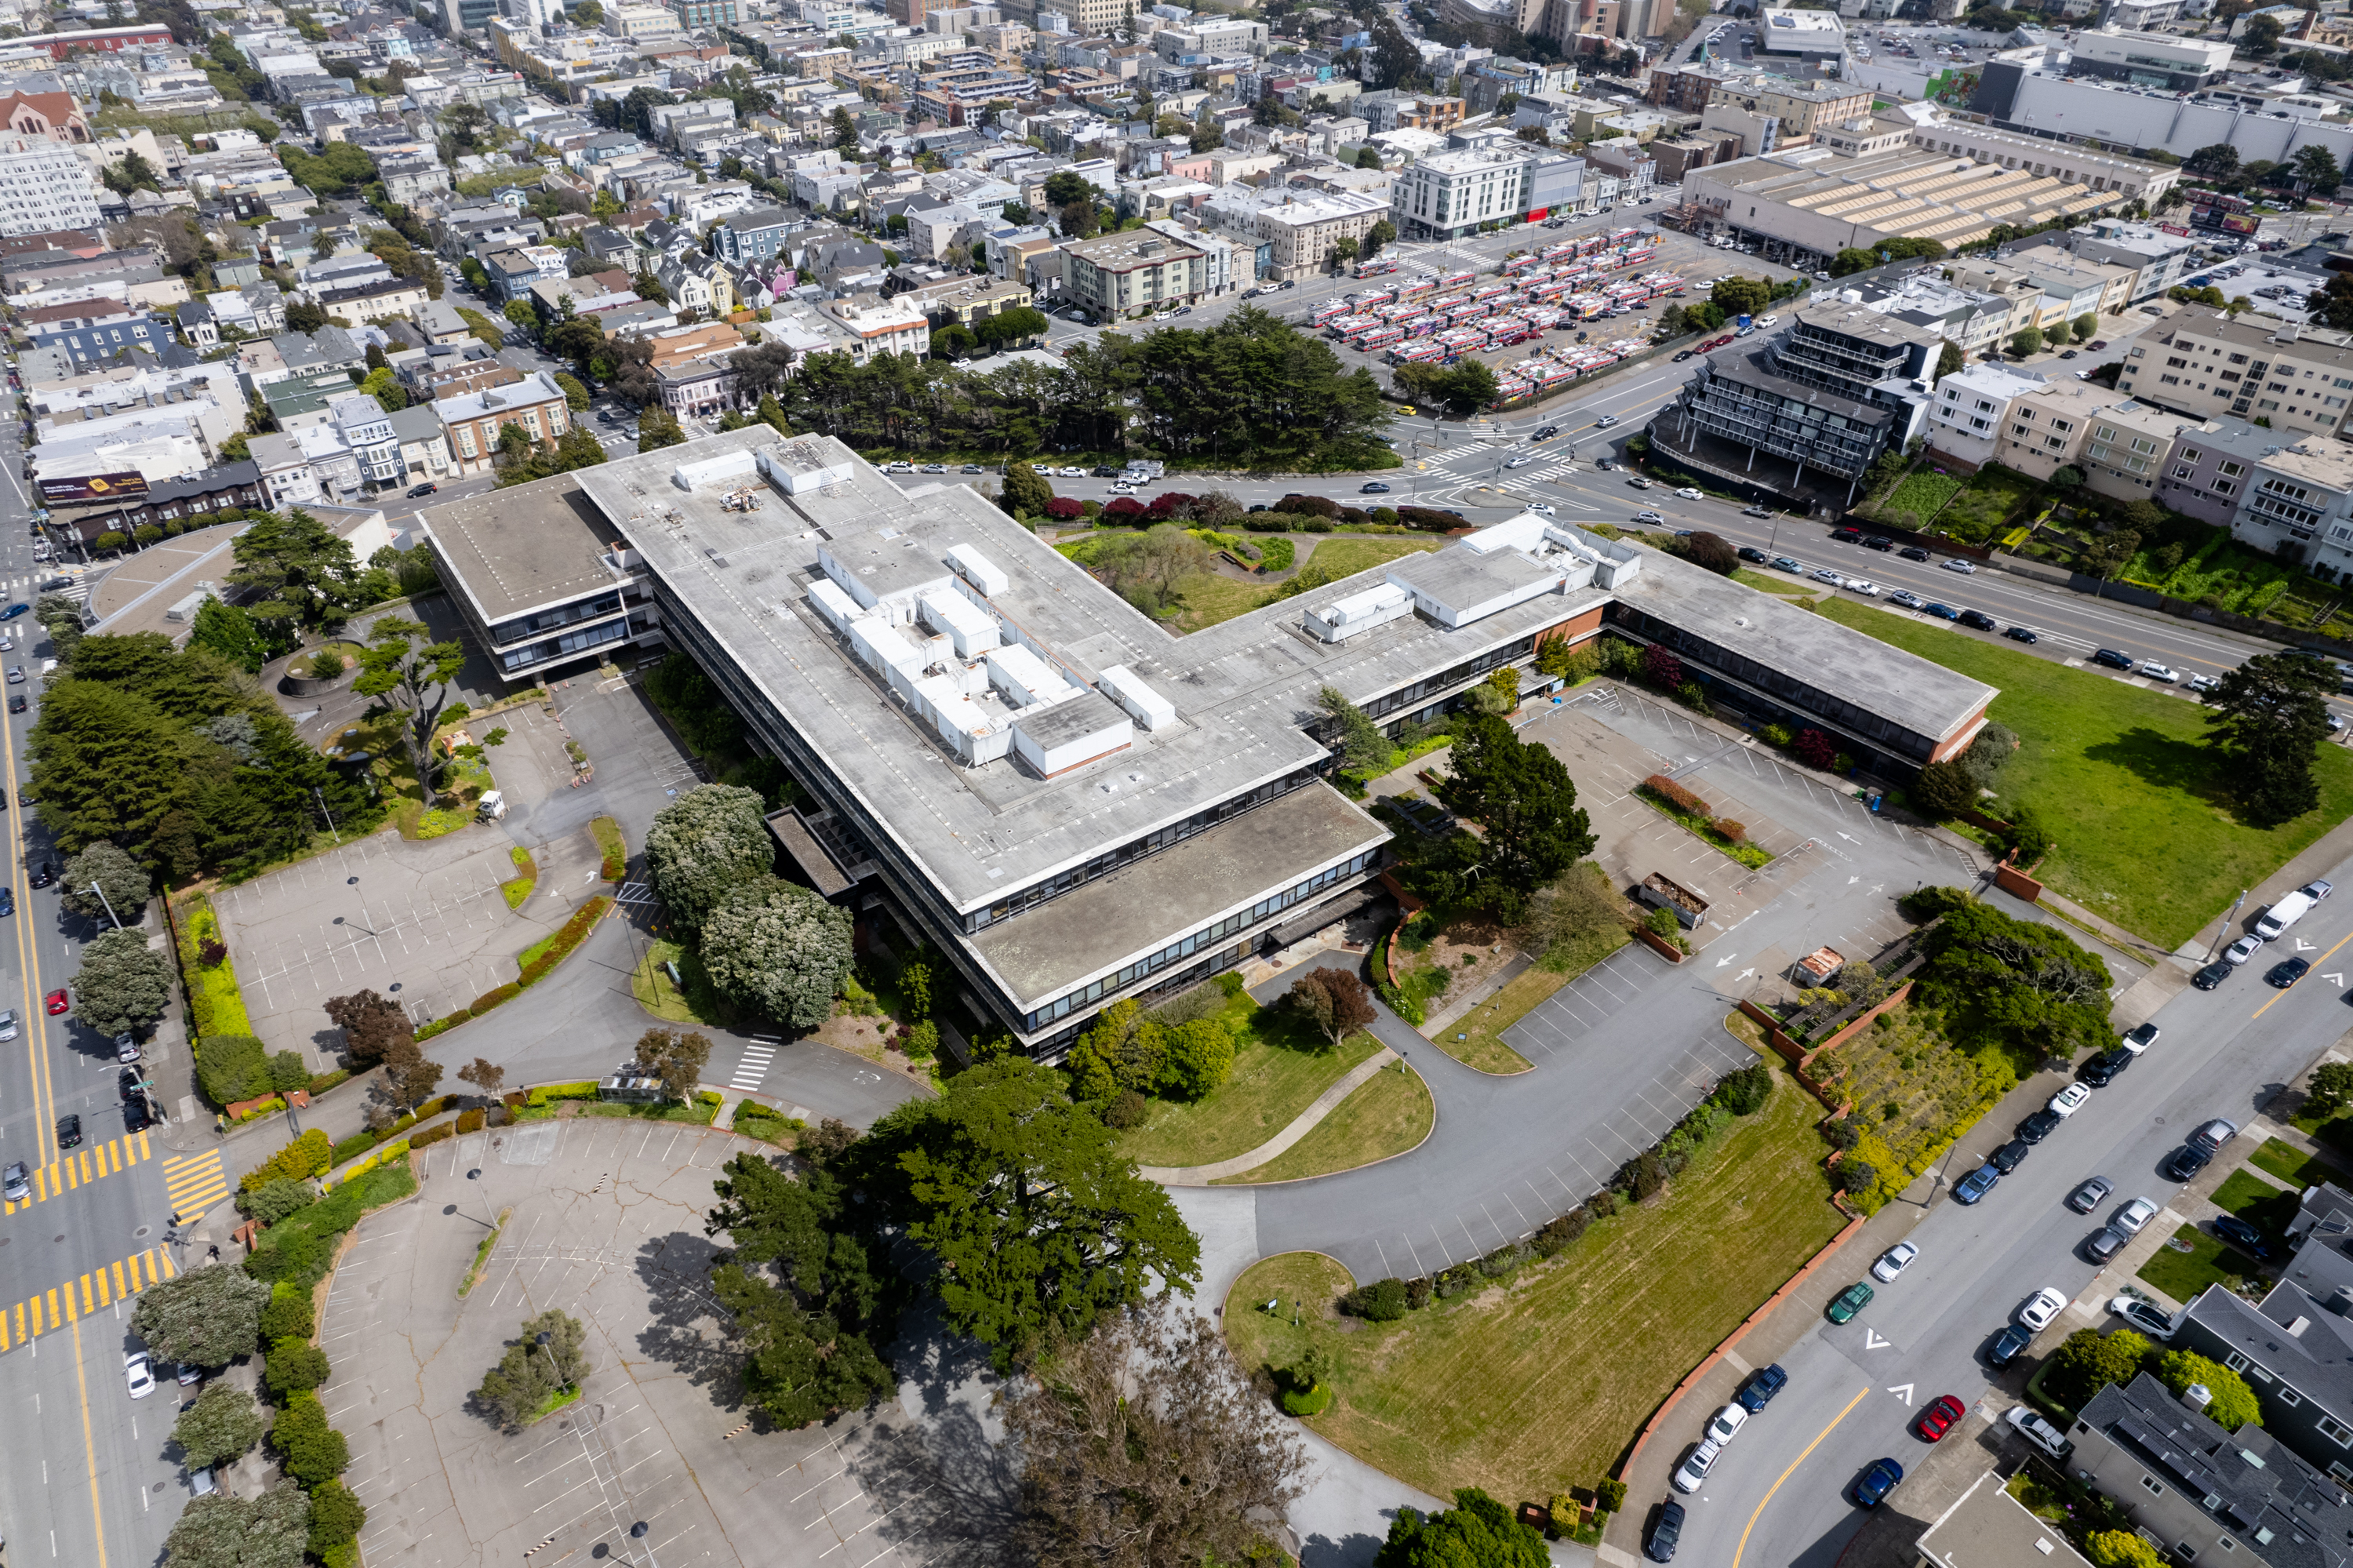 An aerial view of a large, flat-roofed building with parking lot, surrounded by urban streets and densely packed houses.